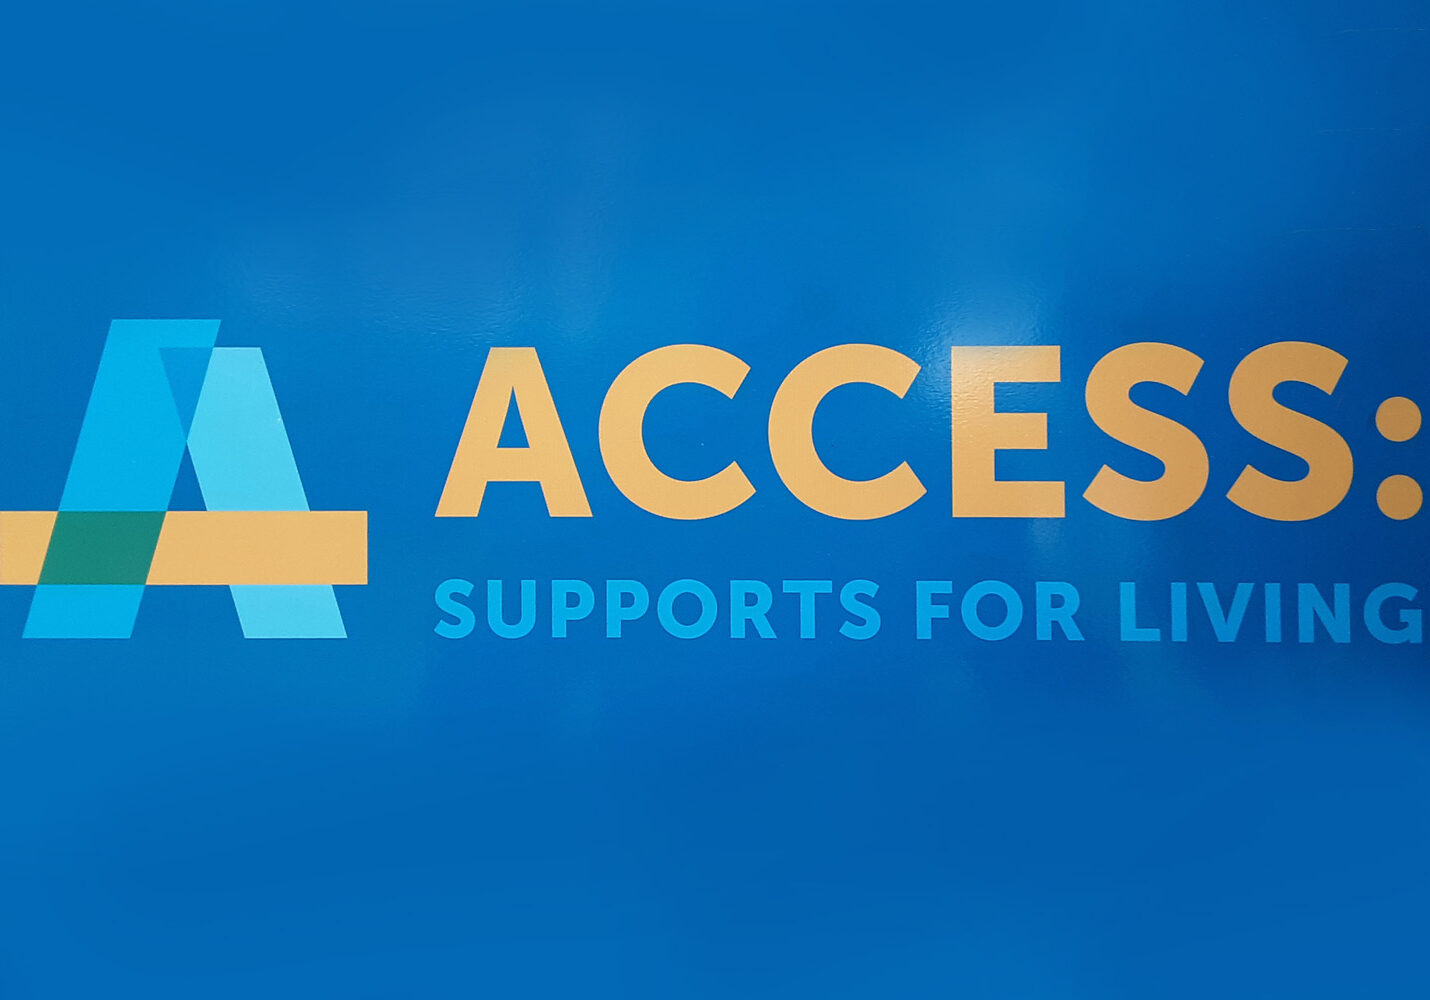 Access supports for living